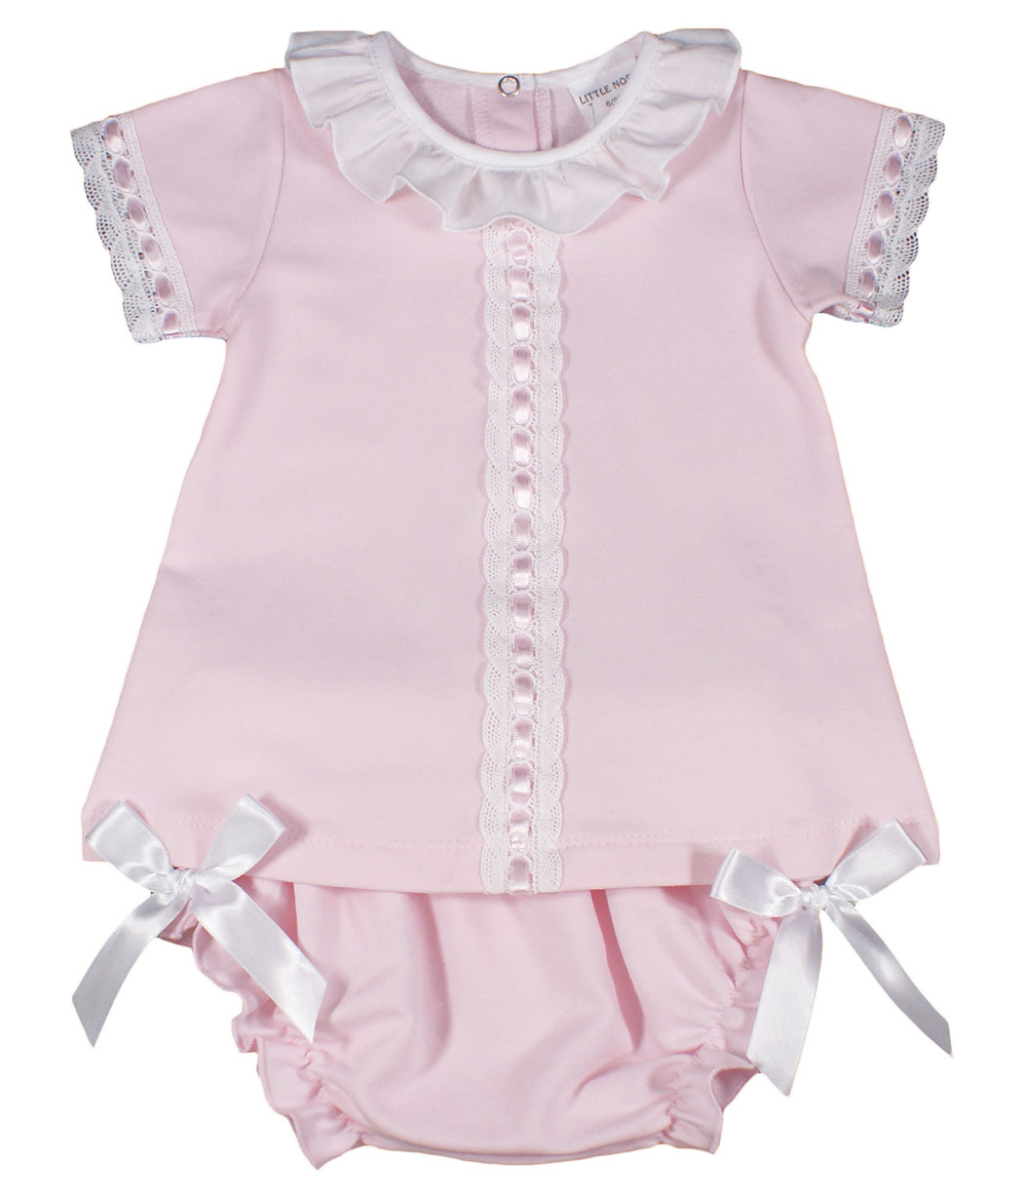 NEW IN GIRLS BABY PINK ROMPERS JAM PANT/TOP SPANISH INSPIRED BIG BOWS NEWBORN-6M